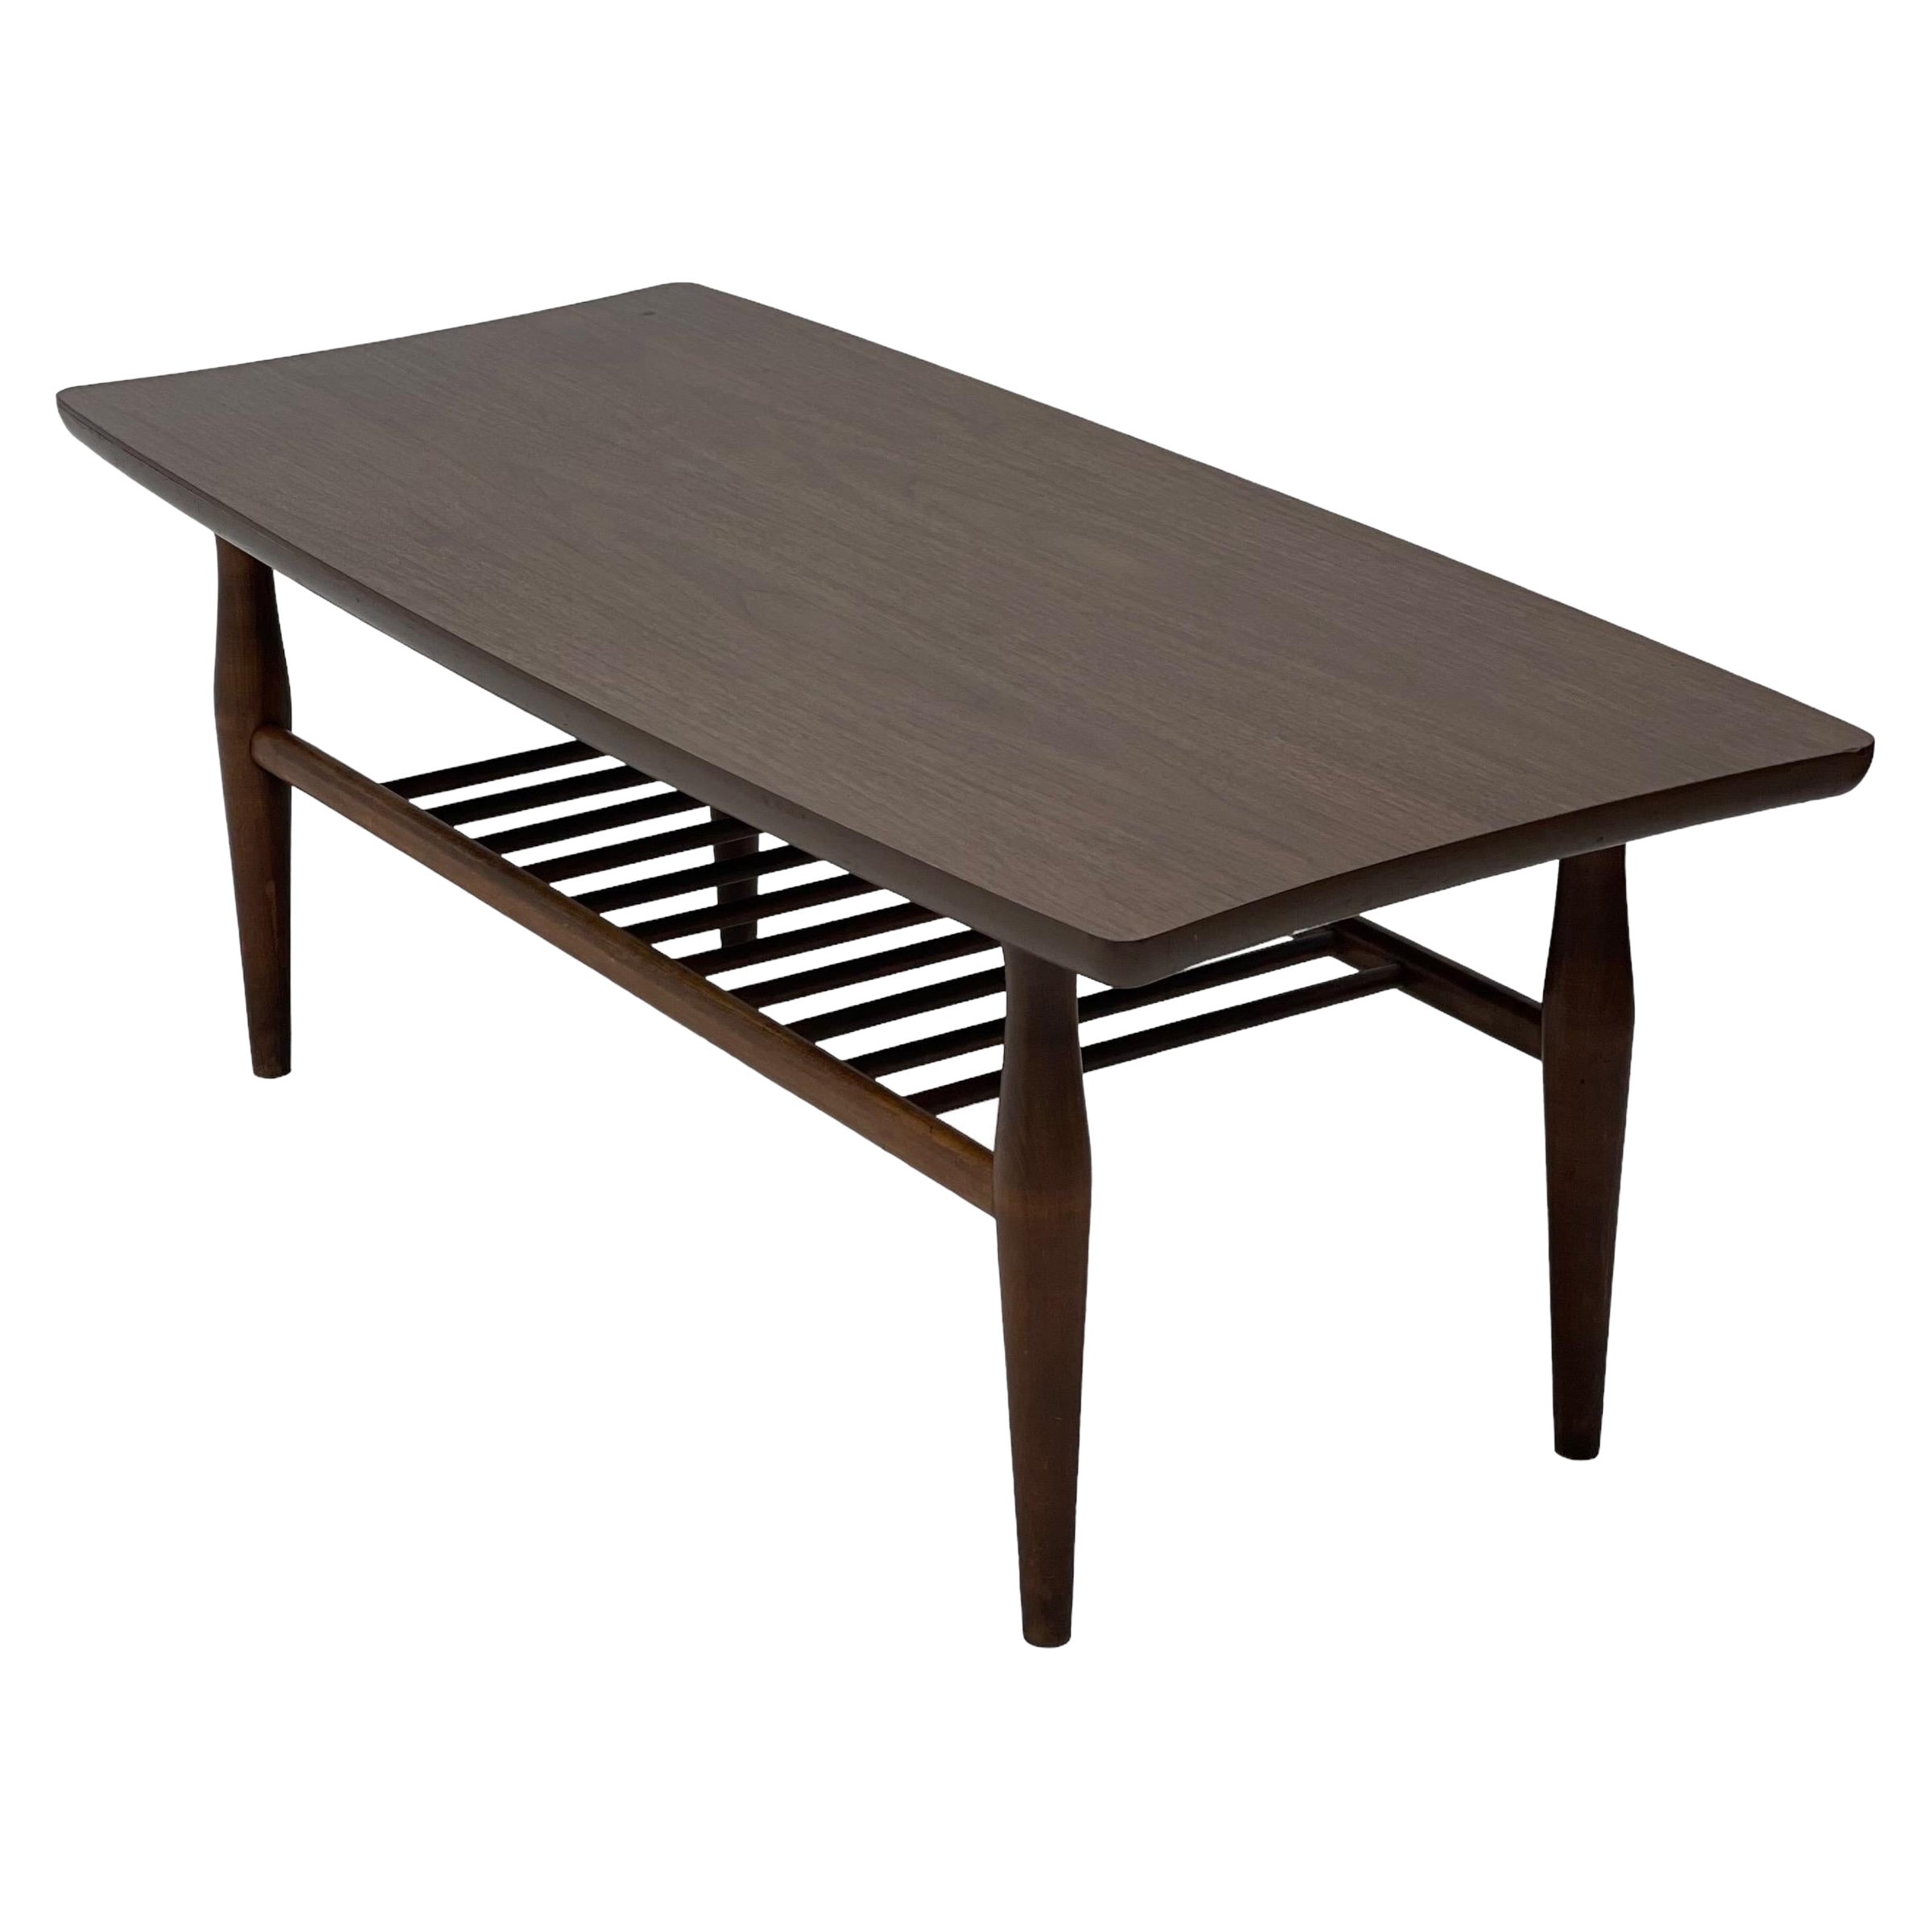 Vintage Mid-Century Modern Walnut Coffee Table with Shelf For Sale